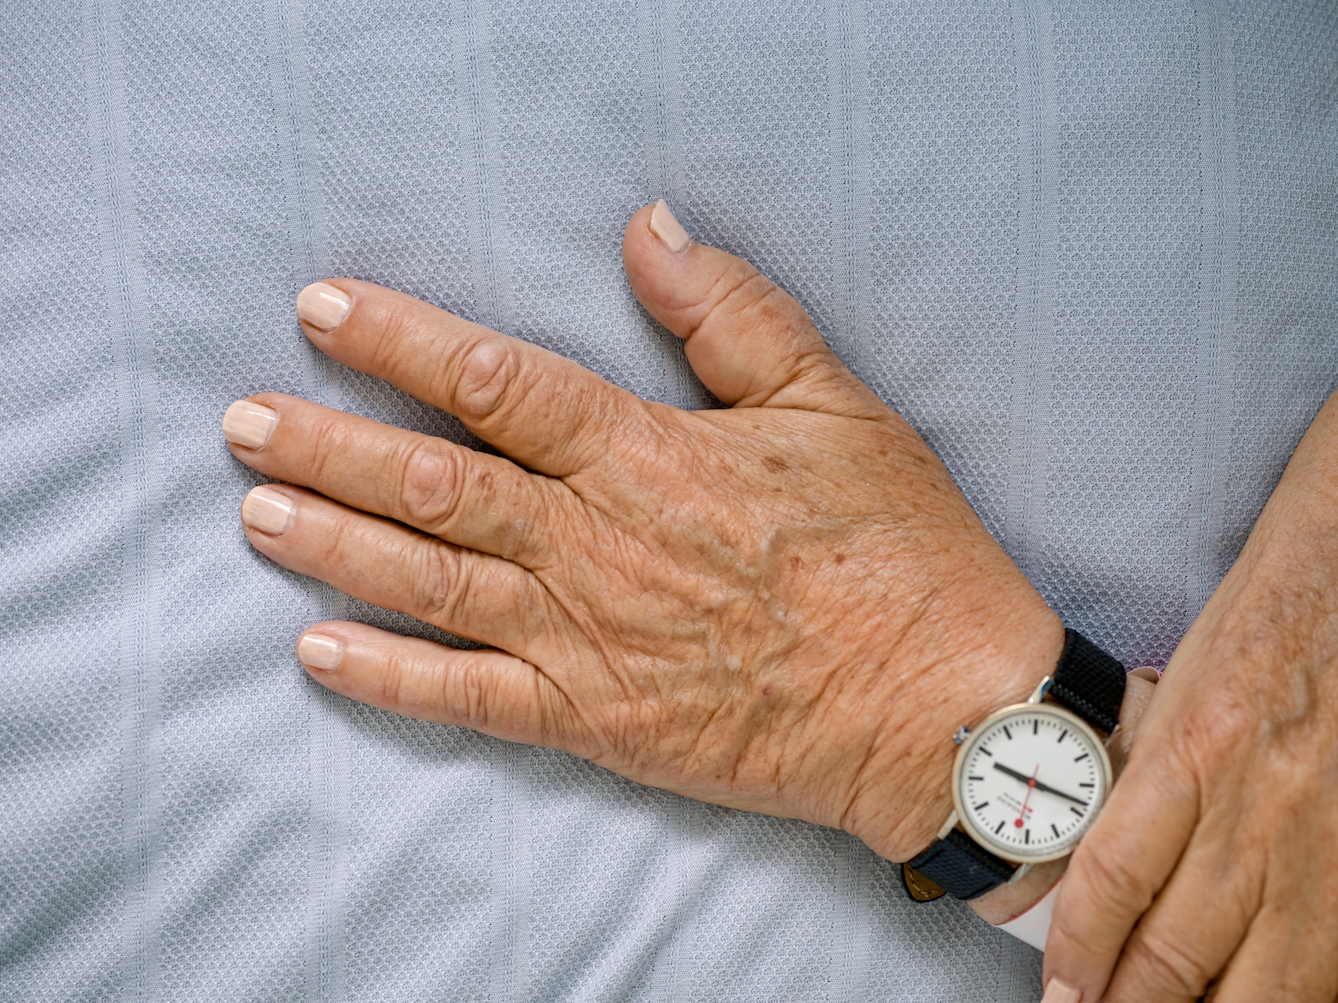 Photograph of the hands of a patient with light pink painted fingernails, resting on a light blue hospital bedsheet.